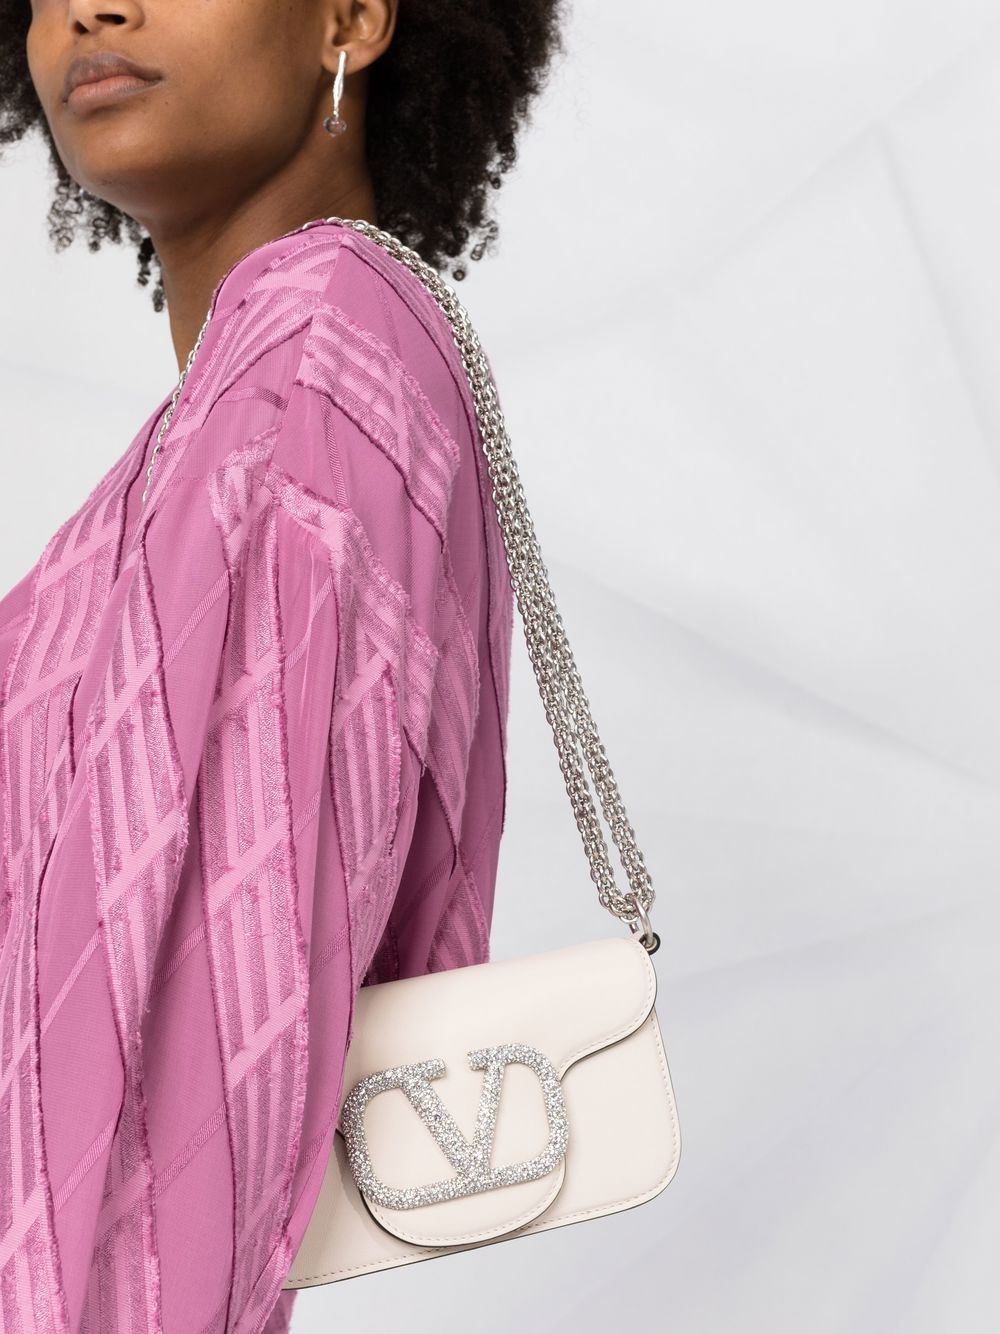 The 4 Biggest Fall Handbag Trends for 2022